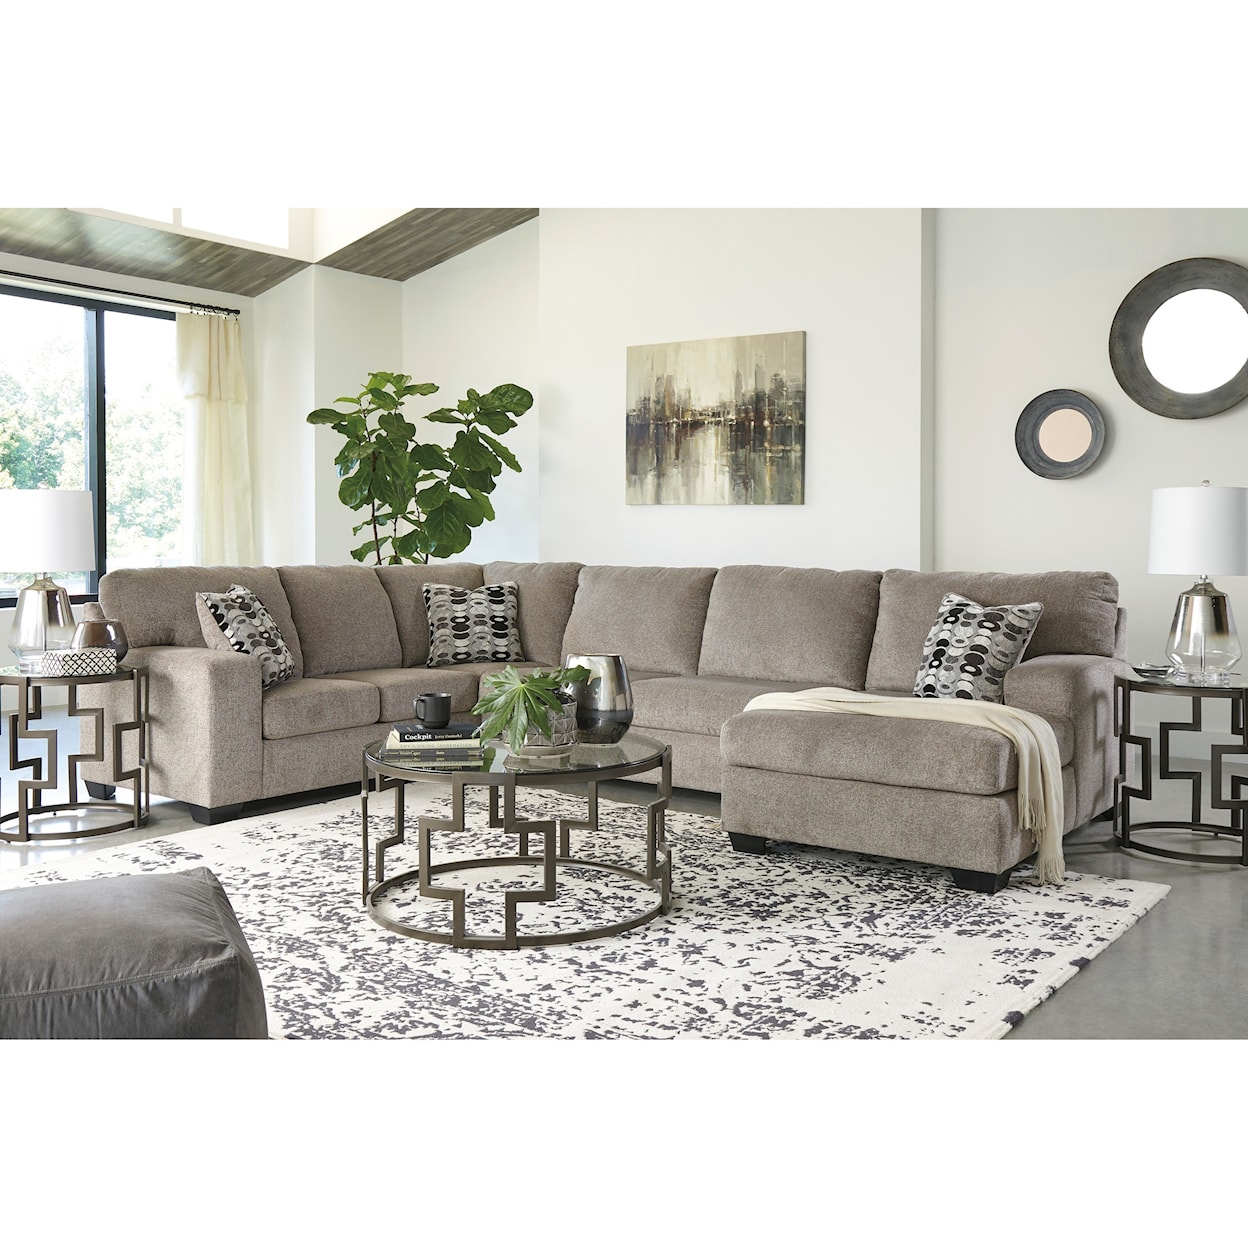 Signature Design by Ashley Ballinasloe 3 Piece Sectional with Chaise